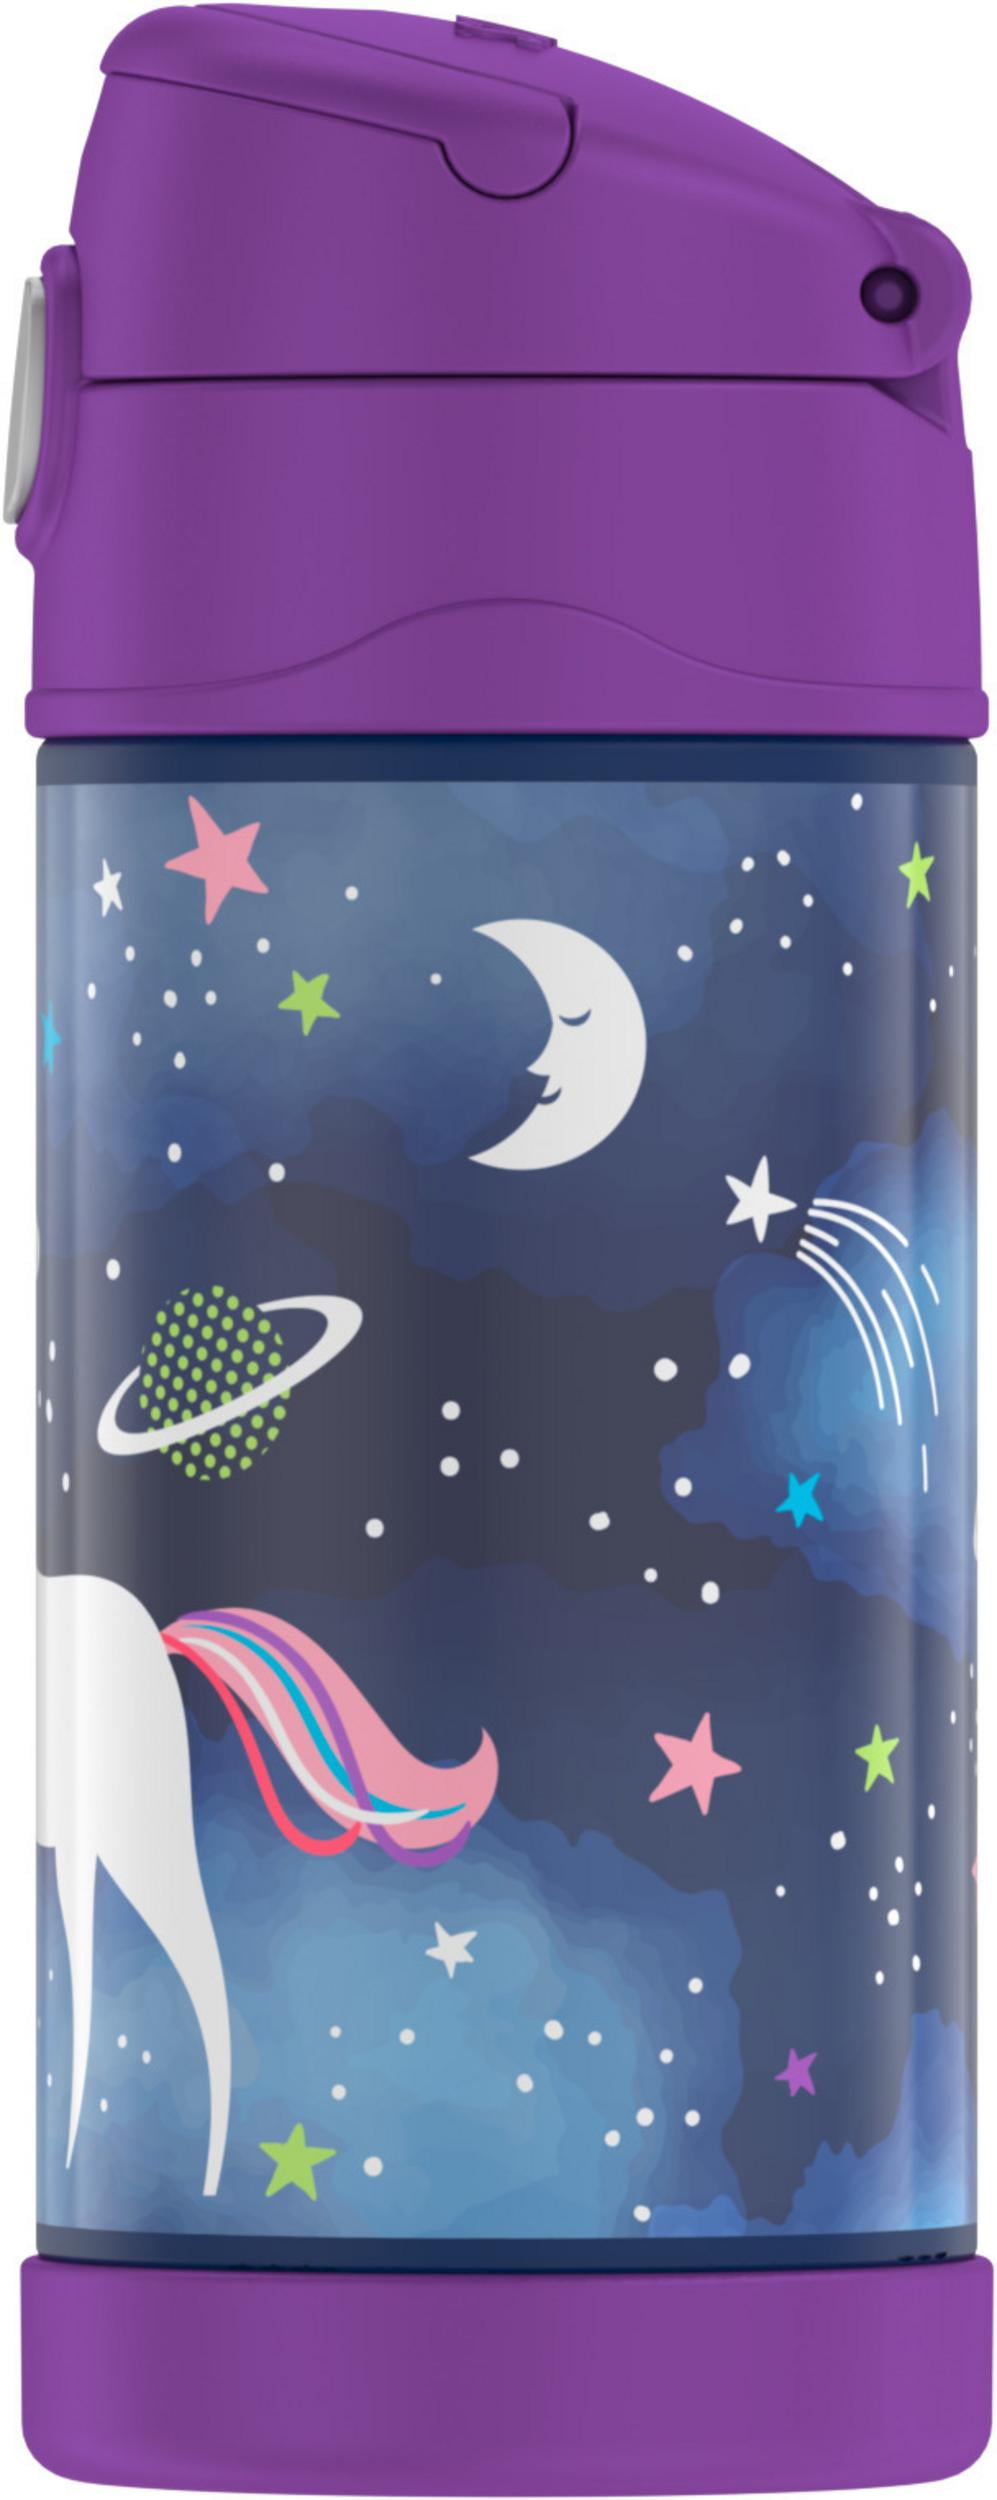 Thermos 12oz Unicorn FUNtainer Water Bottle with Bail Handle..New